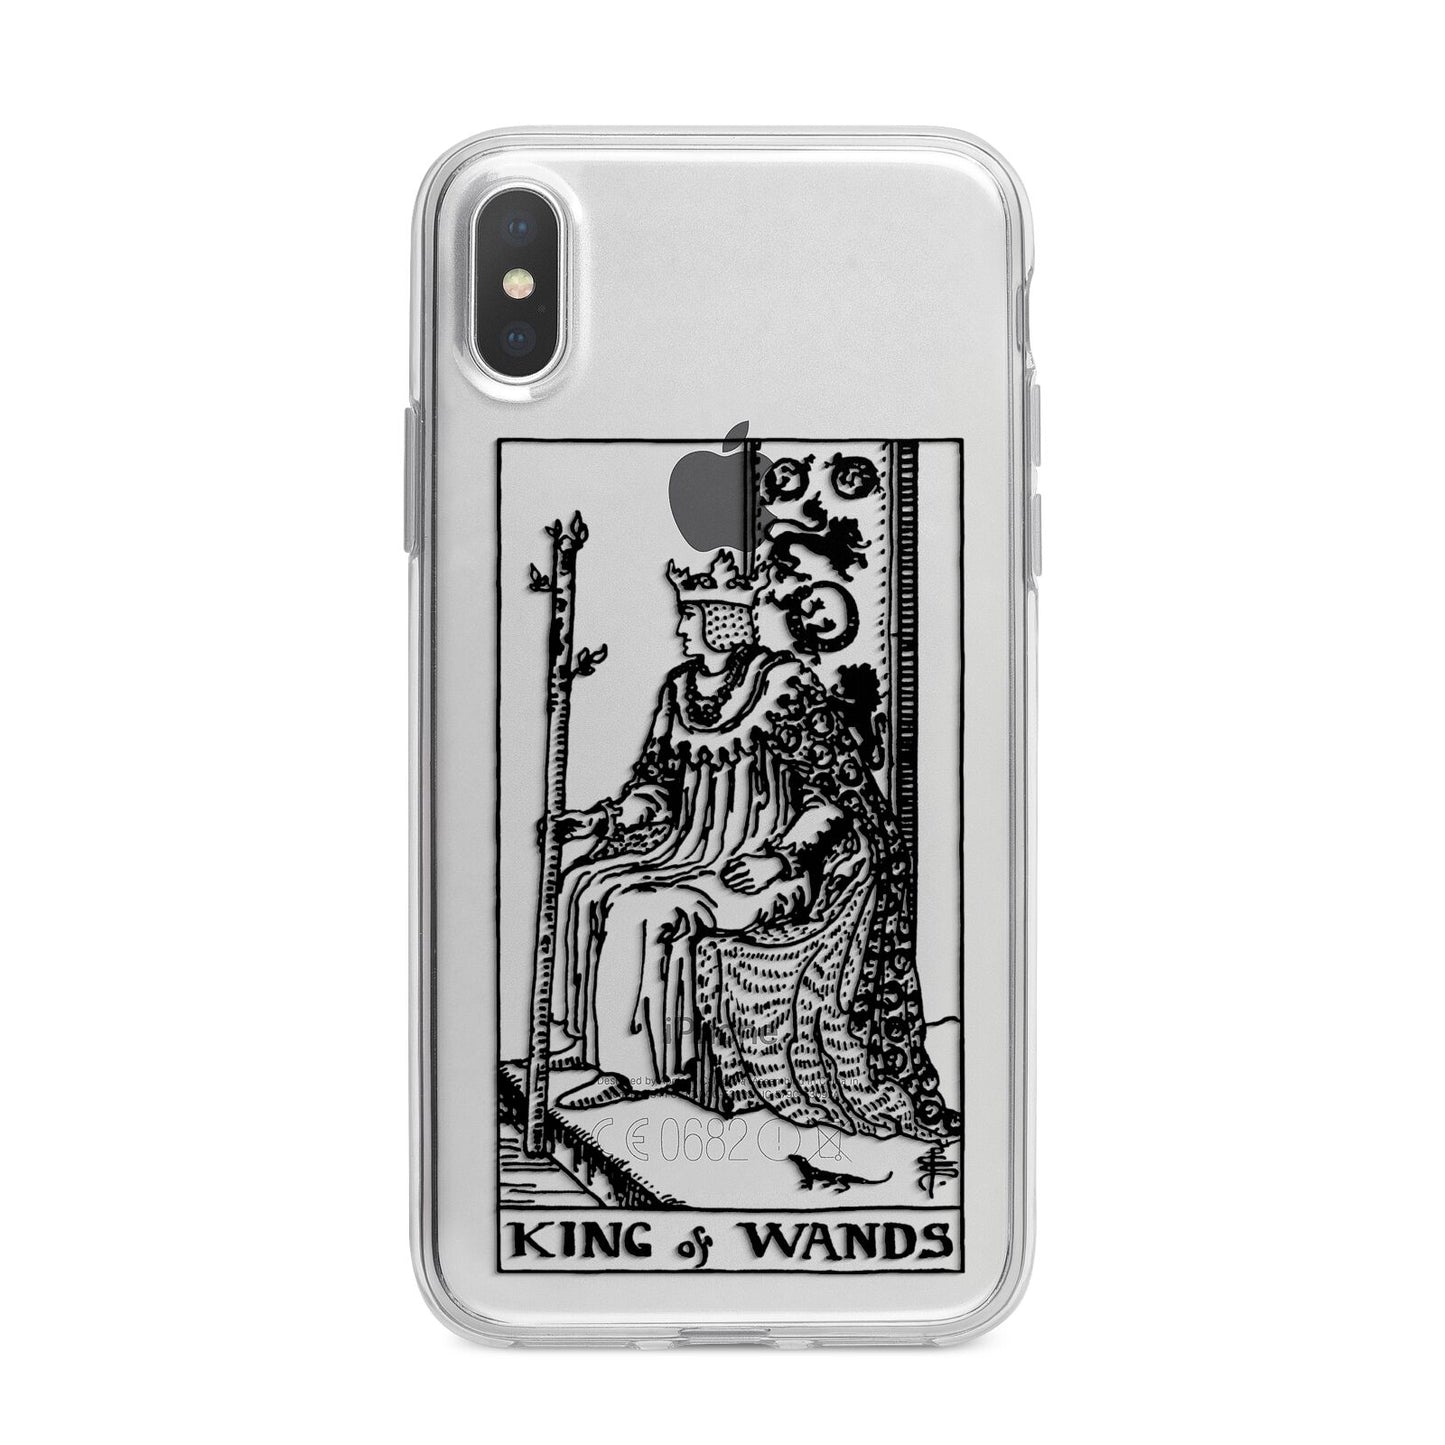 King of Wands Monochrome iPhone X Bumper Case on Silver iPhone Alternative Image 1